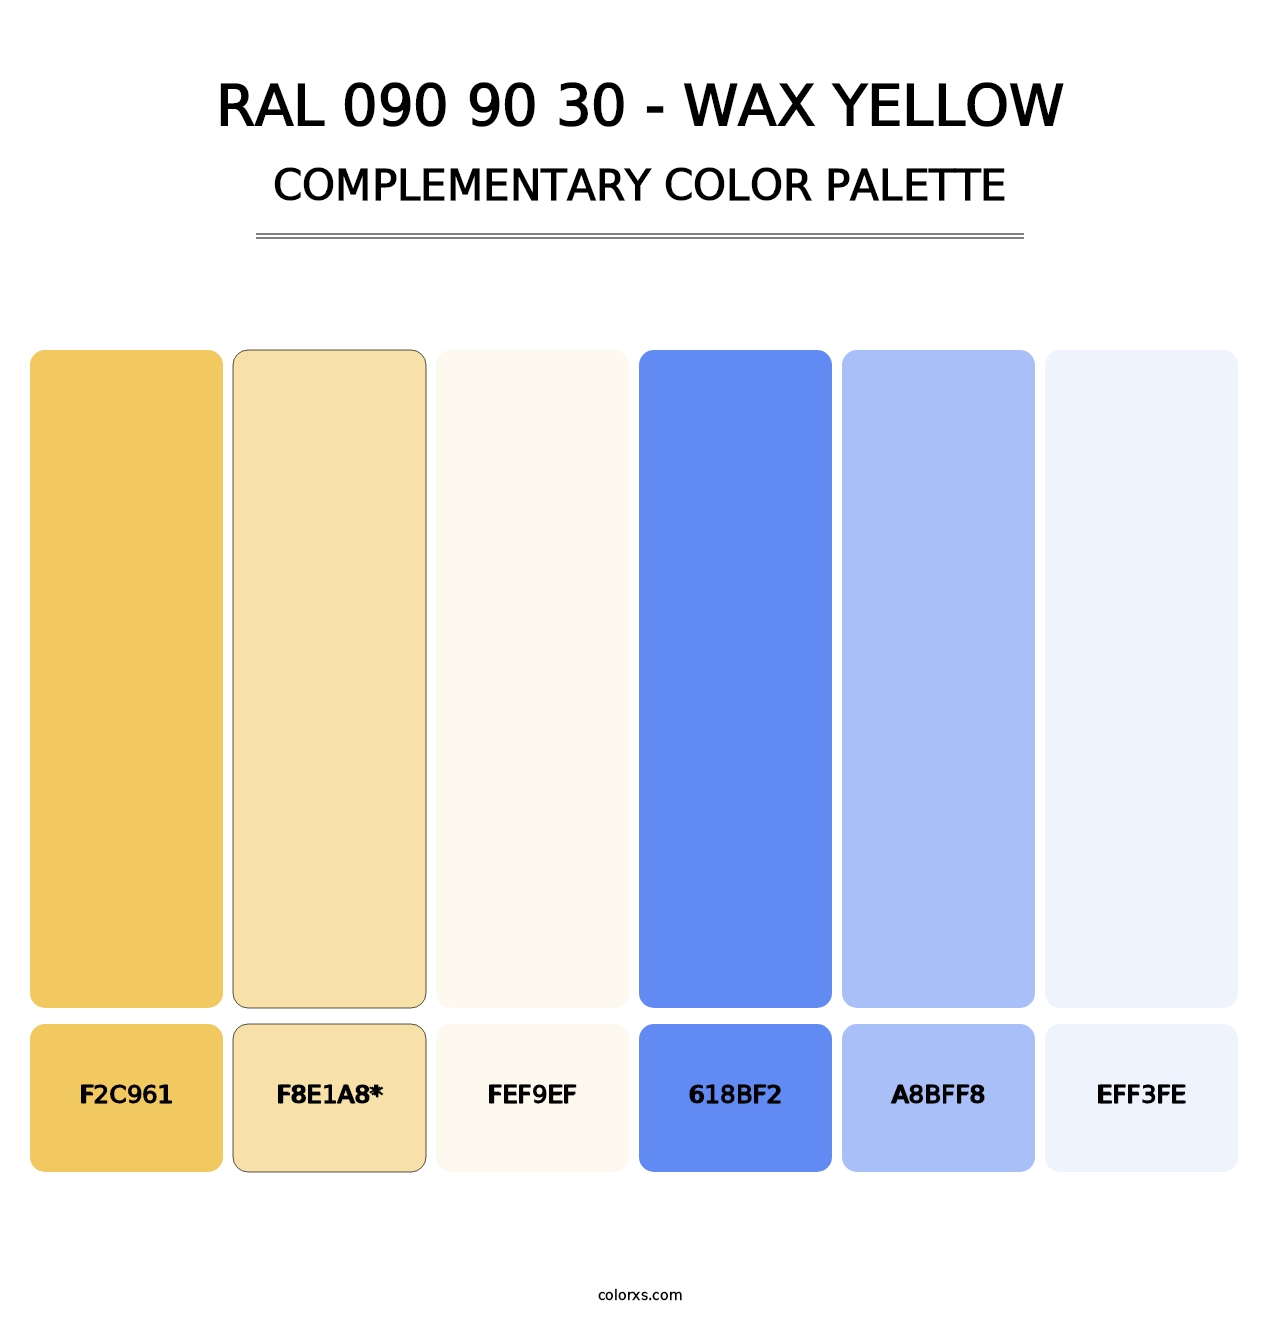 RAL 090 90 30 - Wax Yellow - Complementary Color Palette